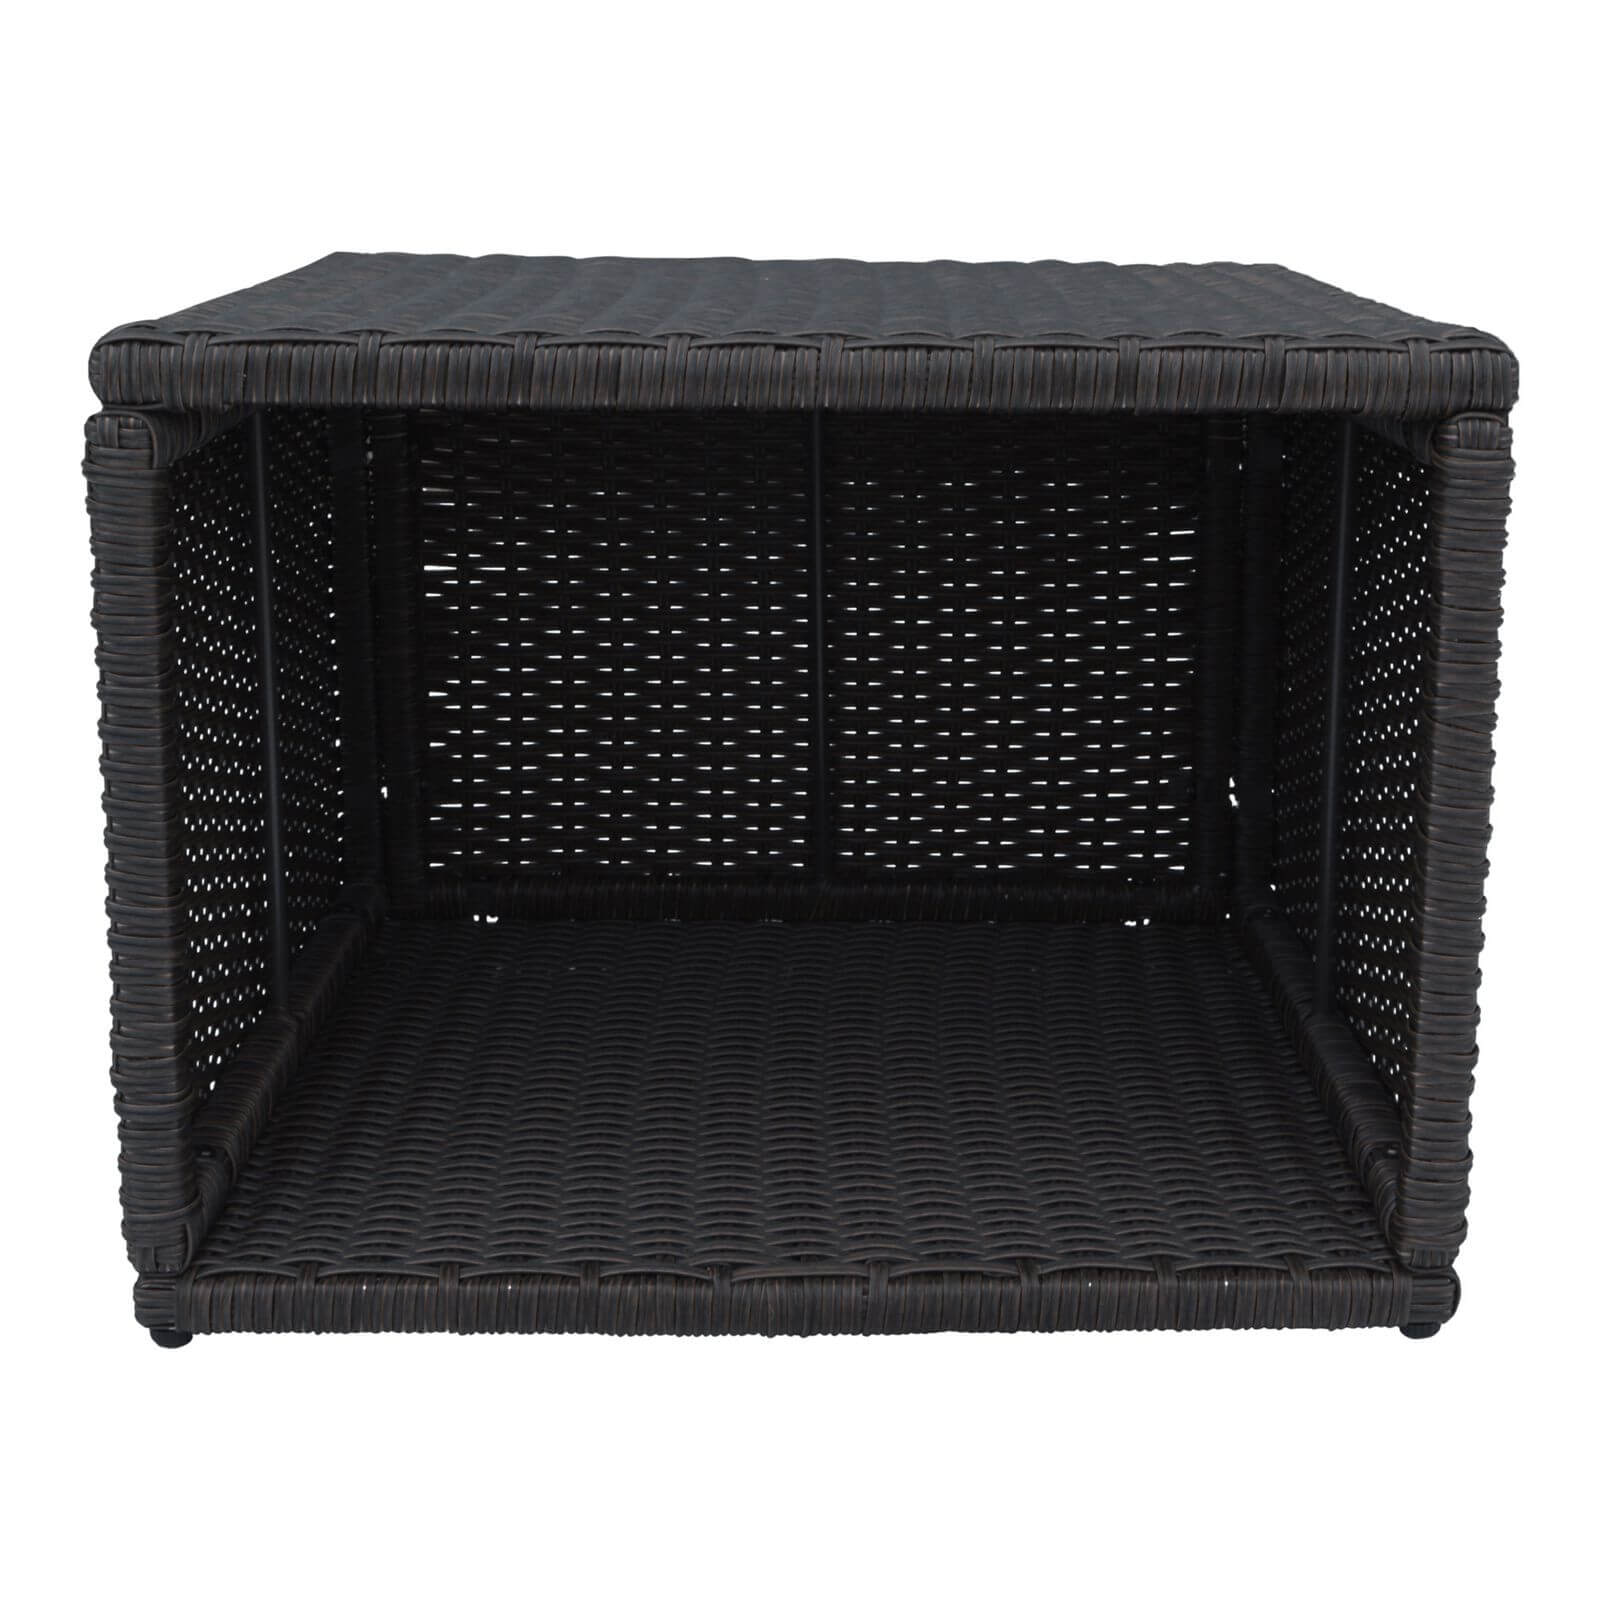 Canadian Spa Rattan Square Spa Side Table